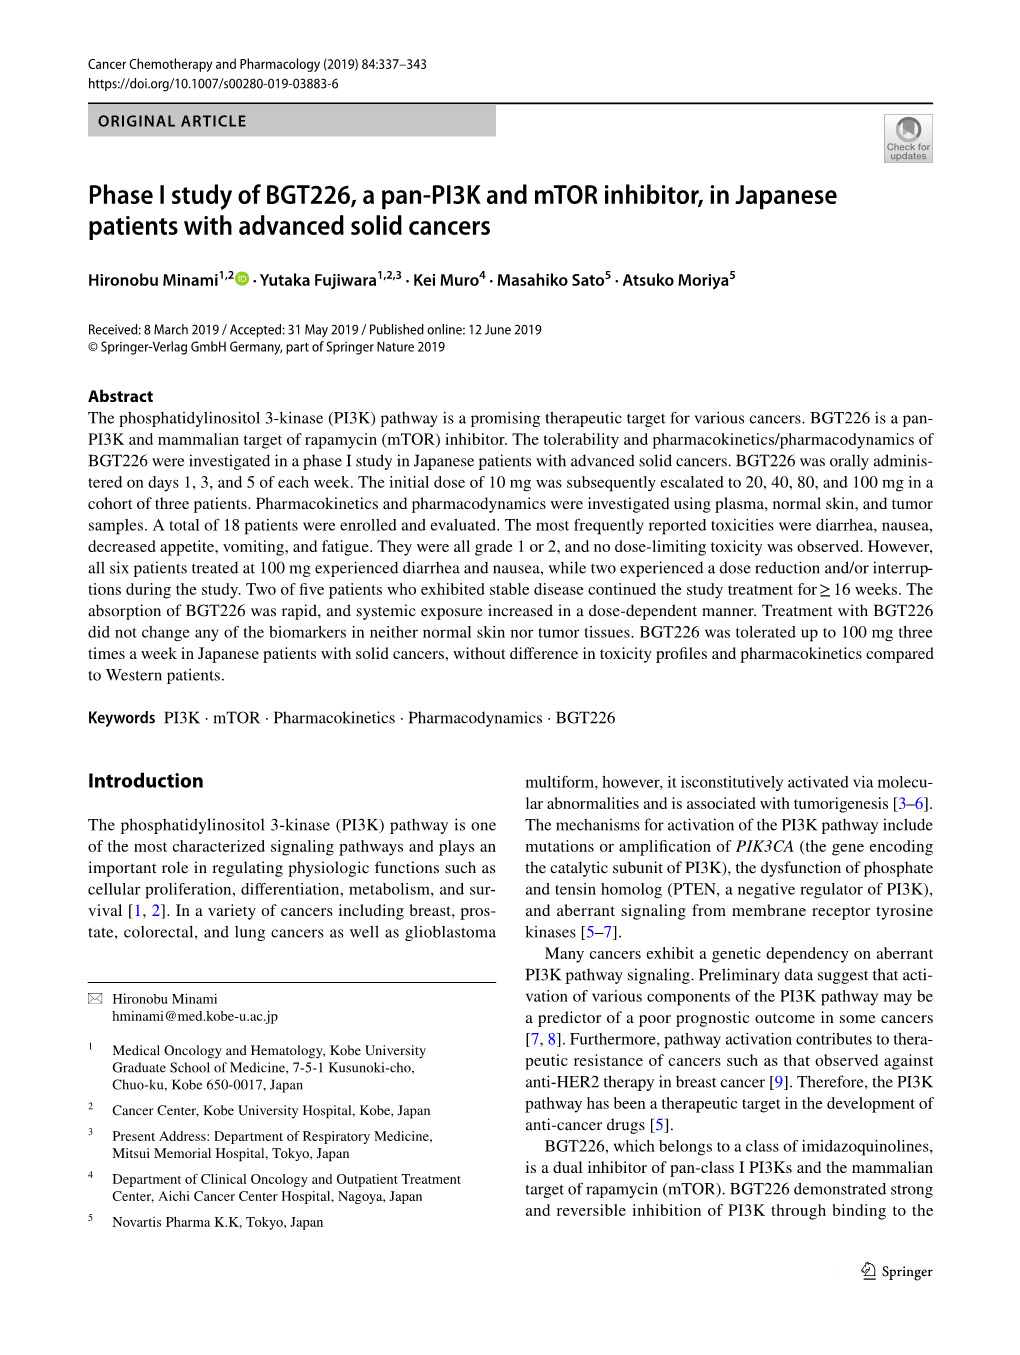 Phase I Study of BGT226, a Pan-PI3K and Mtor Inhibitor, in Japanese